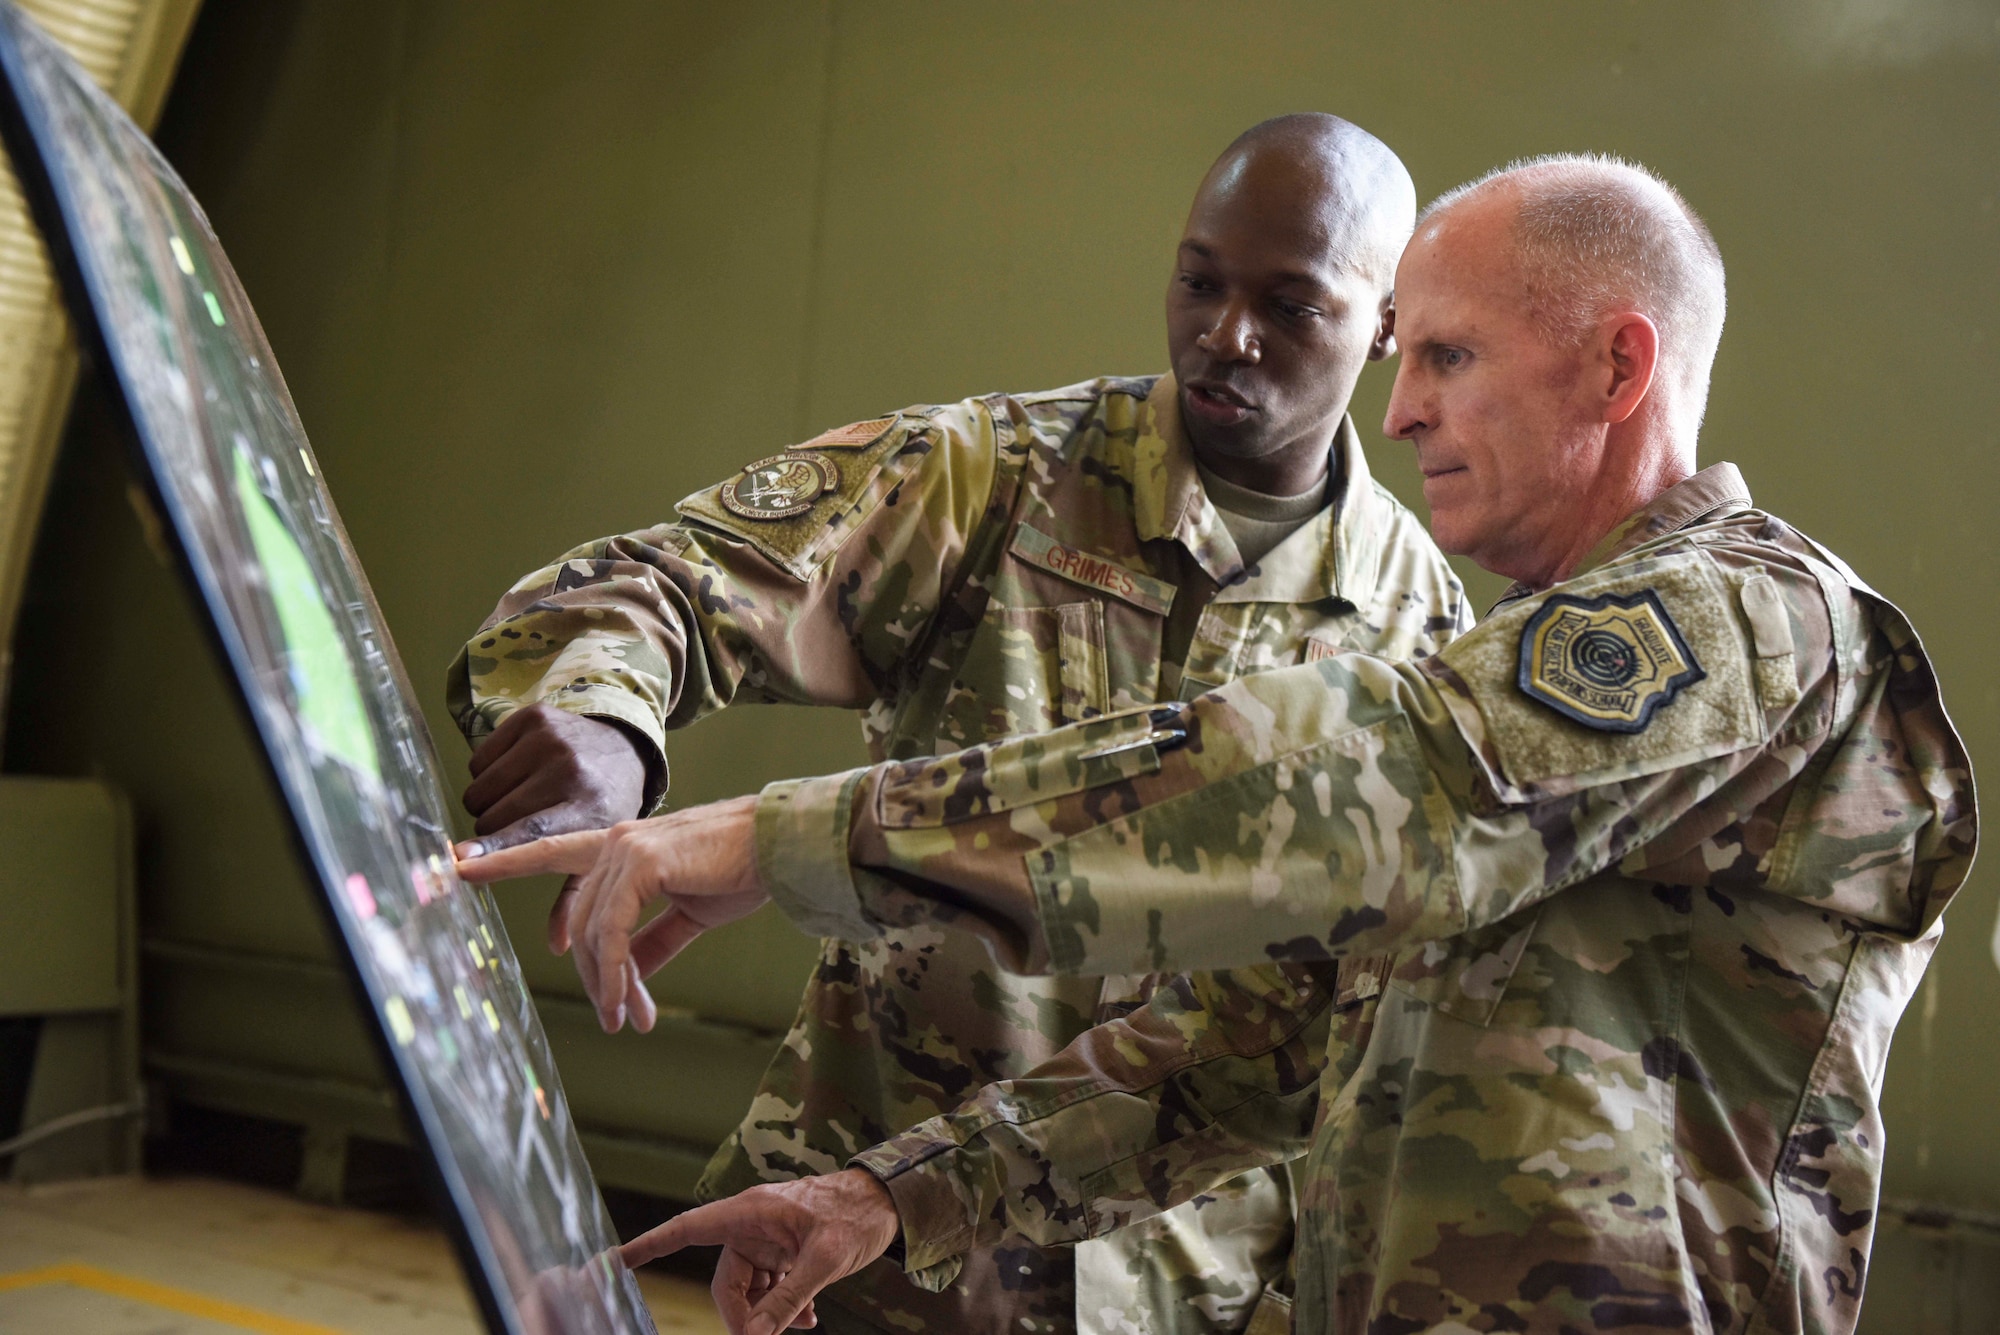 U.S. Air Force Vice Chief of Staff Stephen W. Wilson receives a briefing from Master Sgt. Kevin Grimes, 39th Security Forces Squadron non-commissioned officer in charge of security operations, during a visit to Incirlik Air Base, Turkey, Sept. 29, 2019. Wilson's tour of the installation included visits to various squadrons, in which he observed demonstrations of their mission readiness. (U.S. Air Force photo by Staff Sgt. Joshua Magbanua)